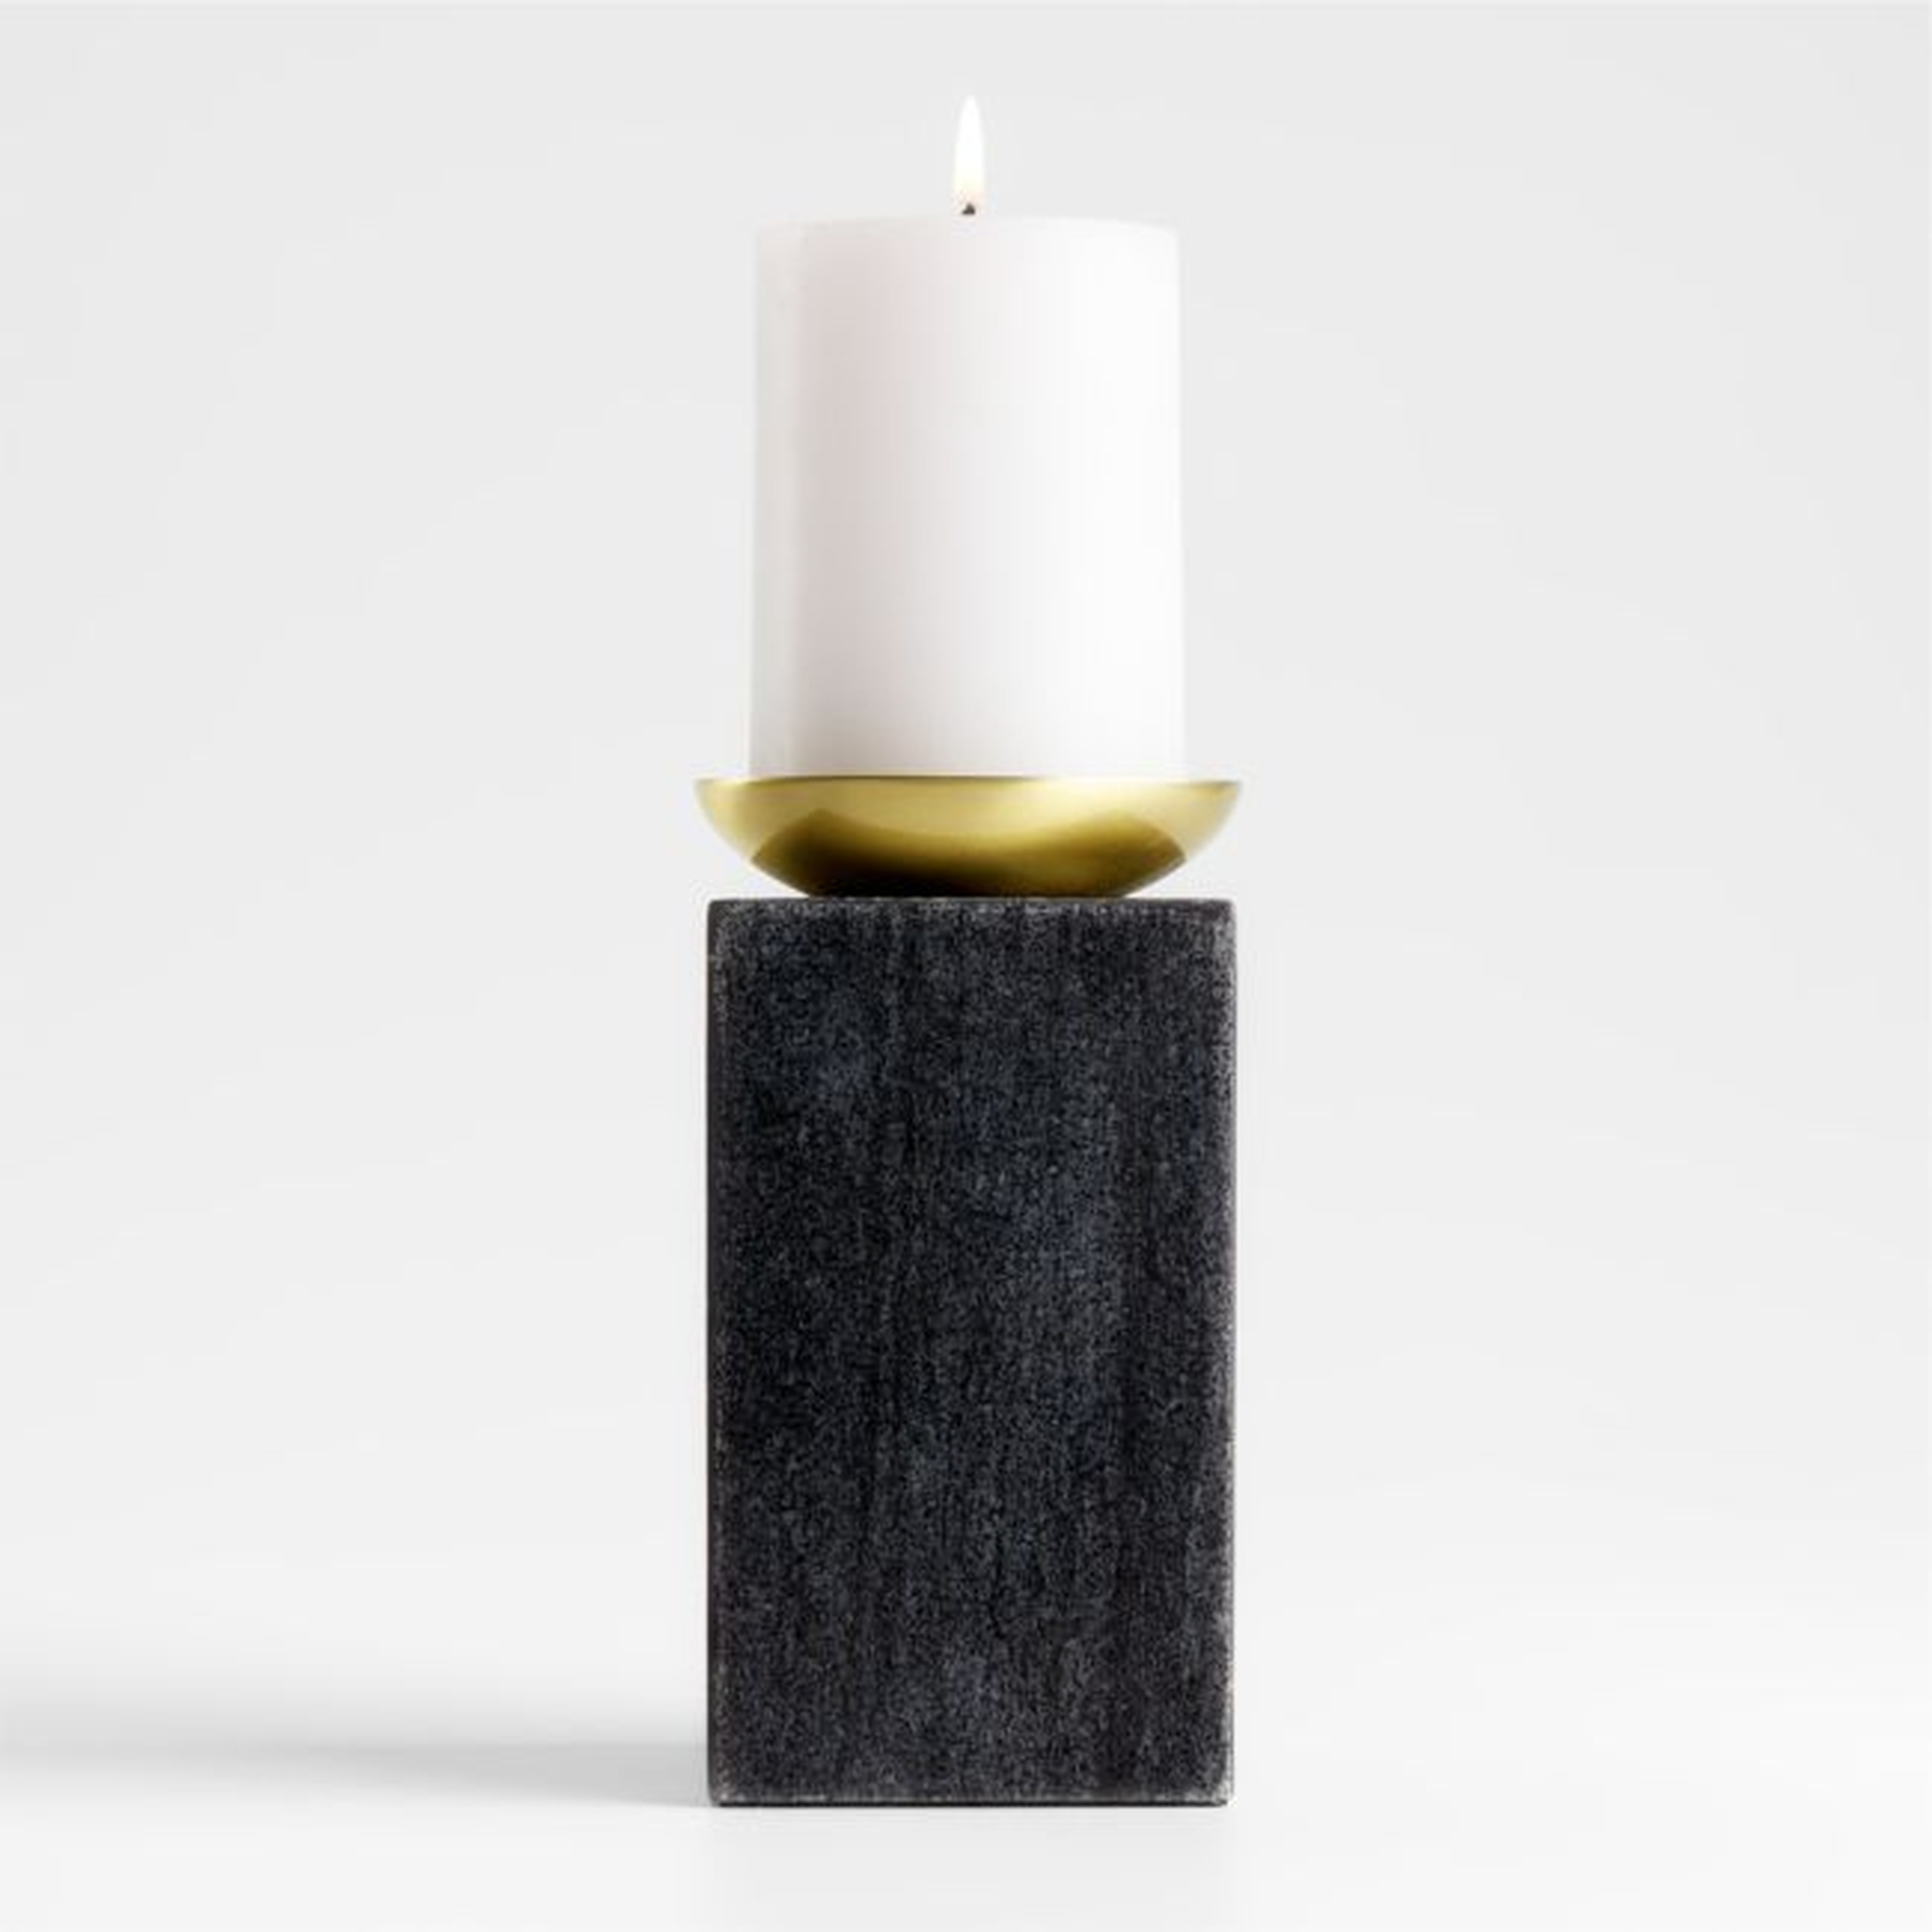 Sain Tall Black Marble Pillar Candle Holder - Crate and Barrel